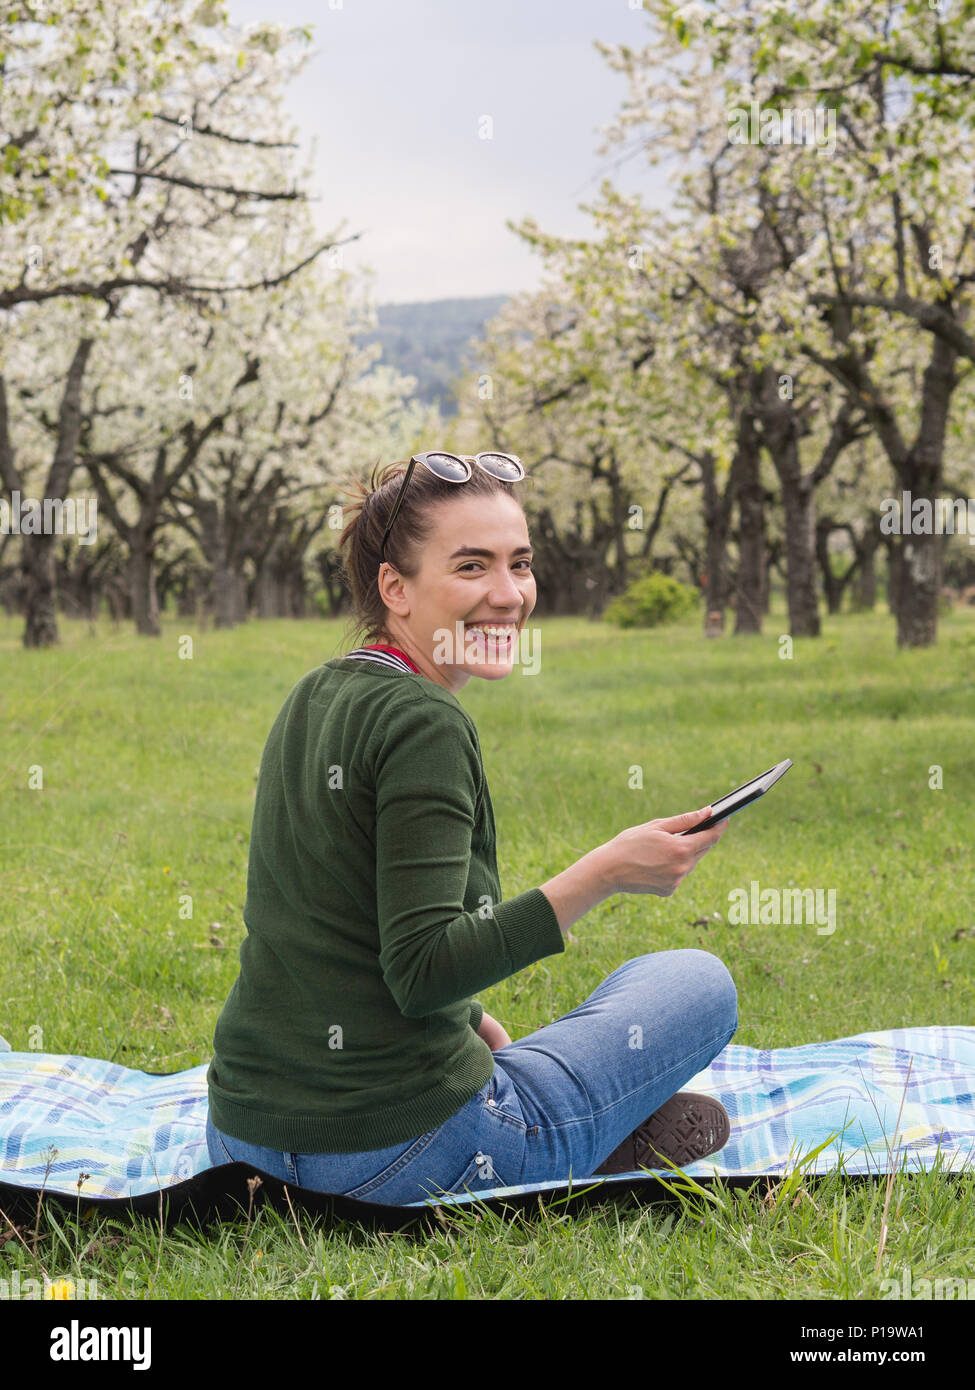 Young attractive woman holding a tablet outdoors and laughing Stock Photo